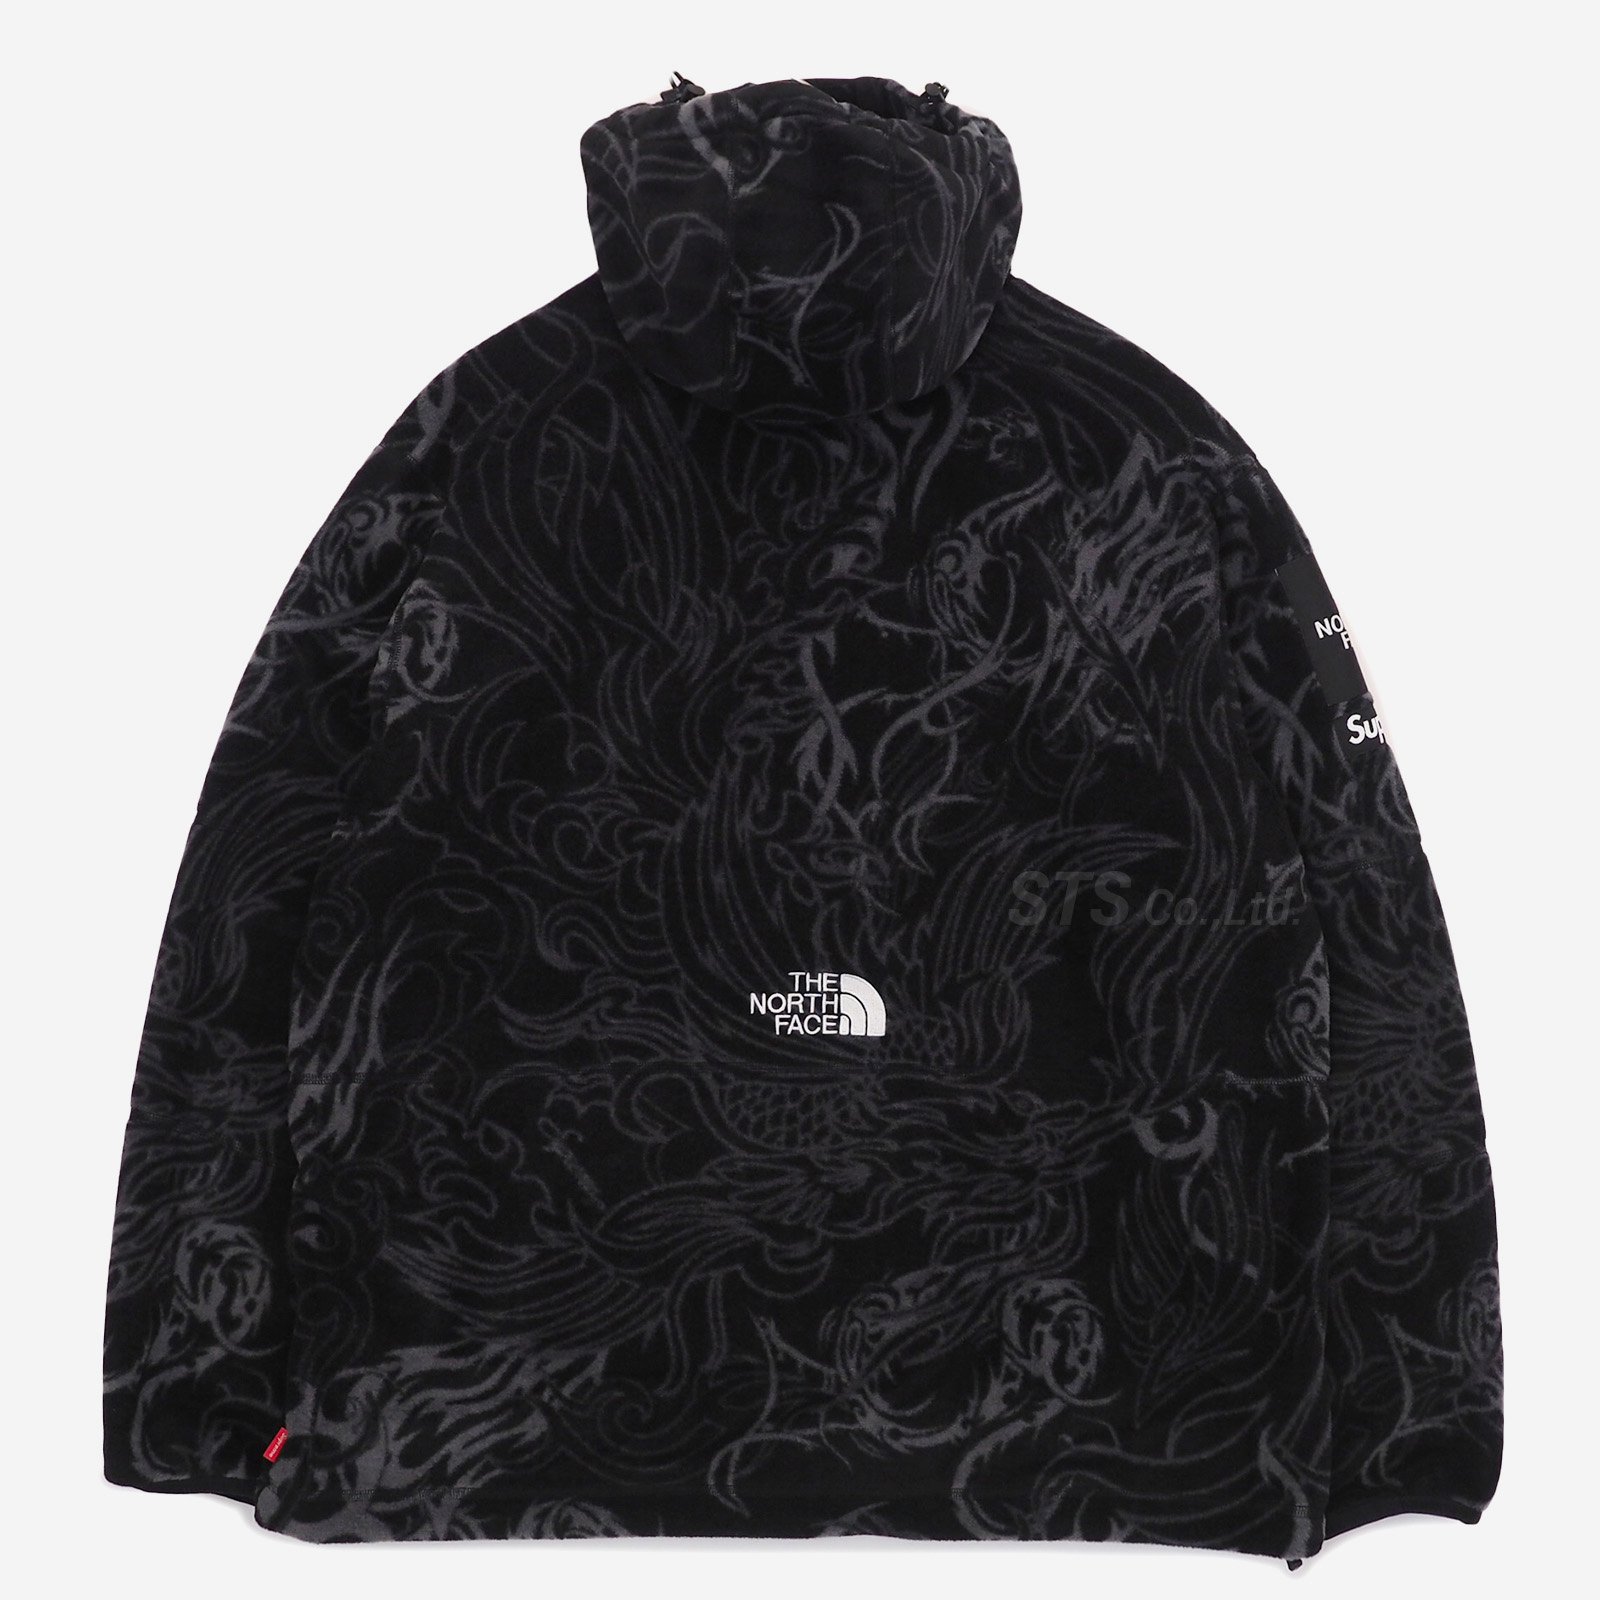 Supreme × THE NORTH FACE 22AW ST FLEECE